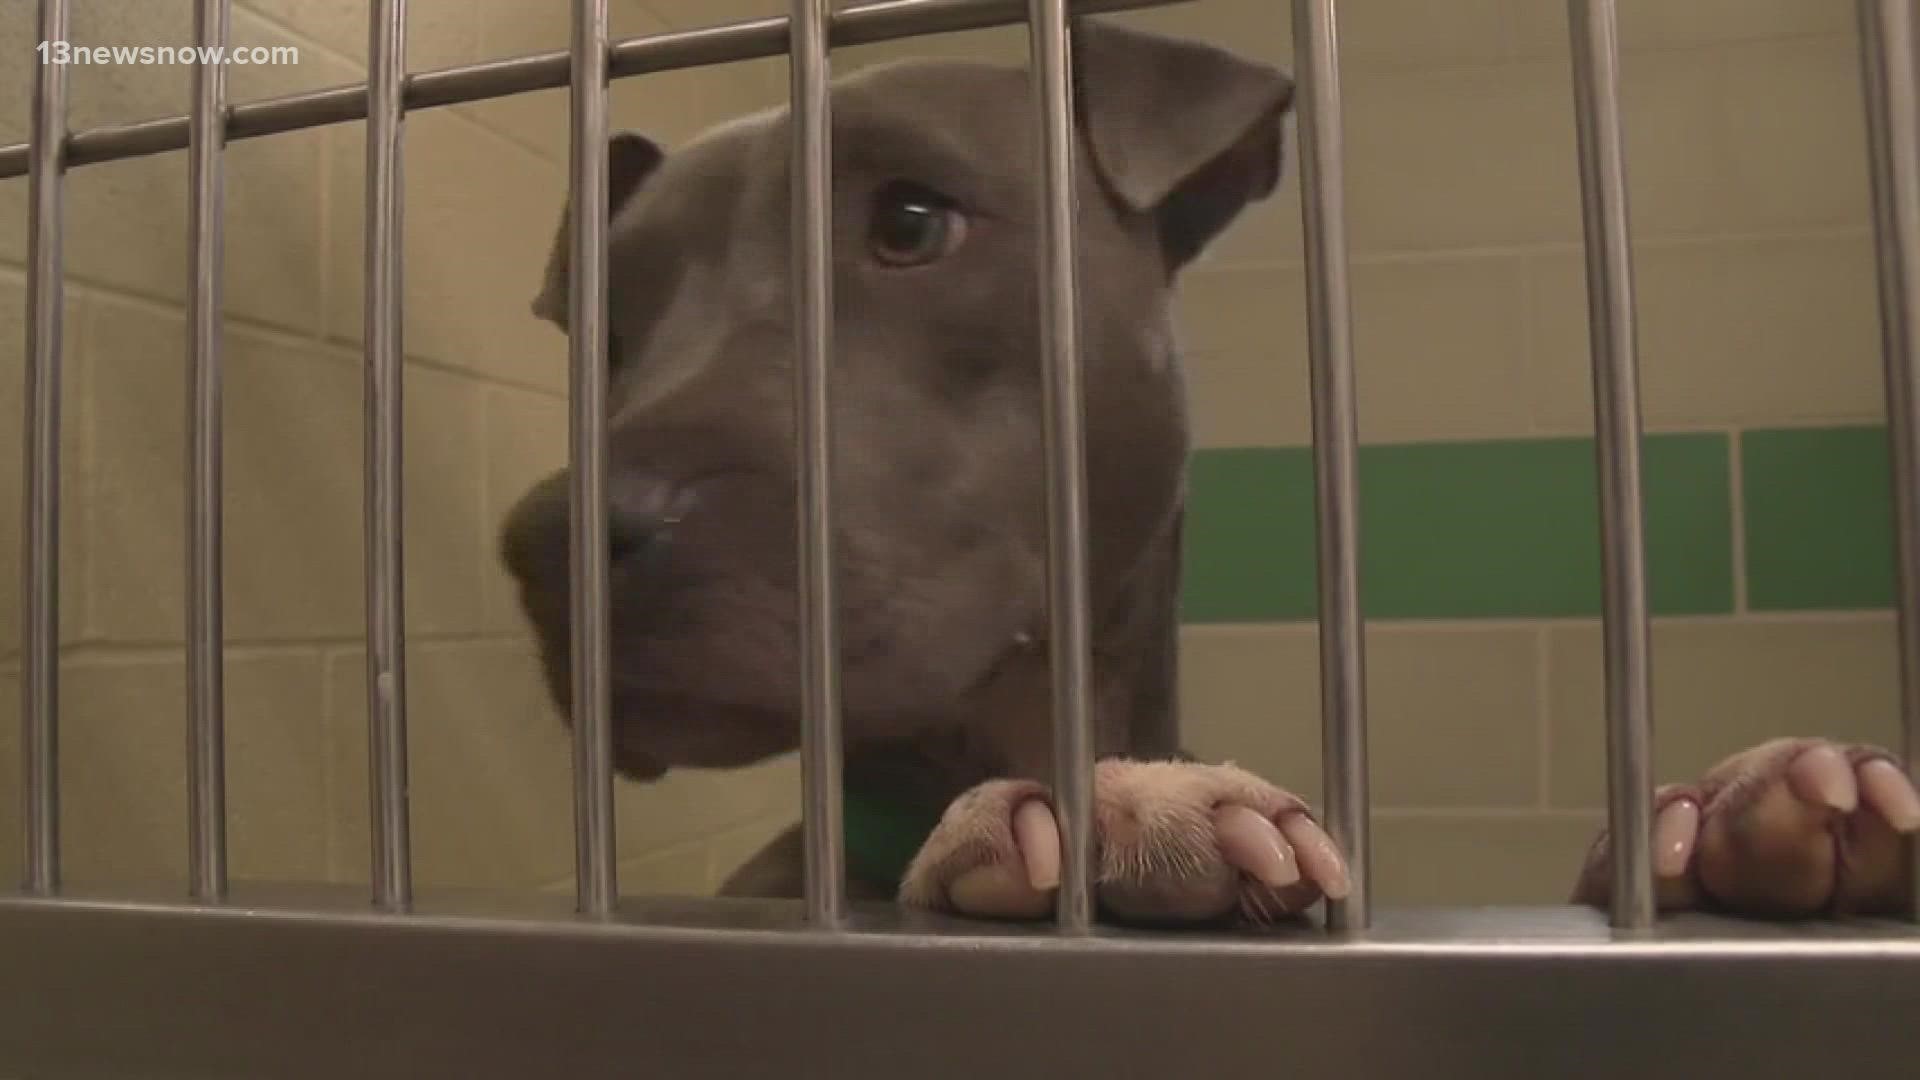 Peninsula Regional Animal Shelter works to reunite pets with families after  Fourth of July 